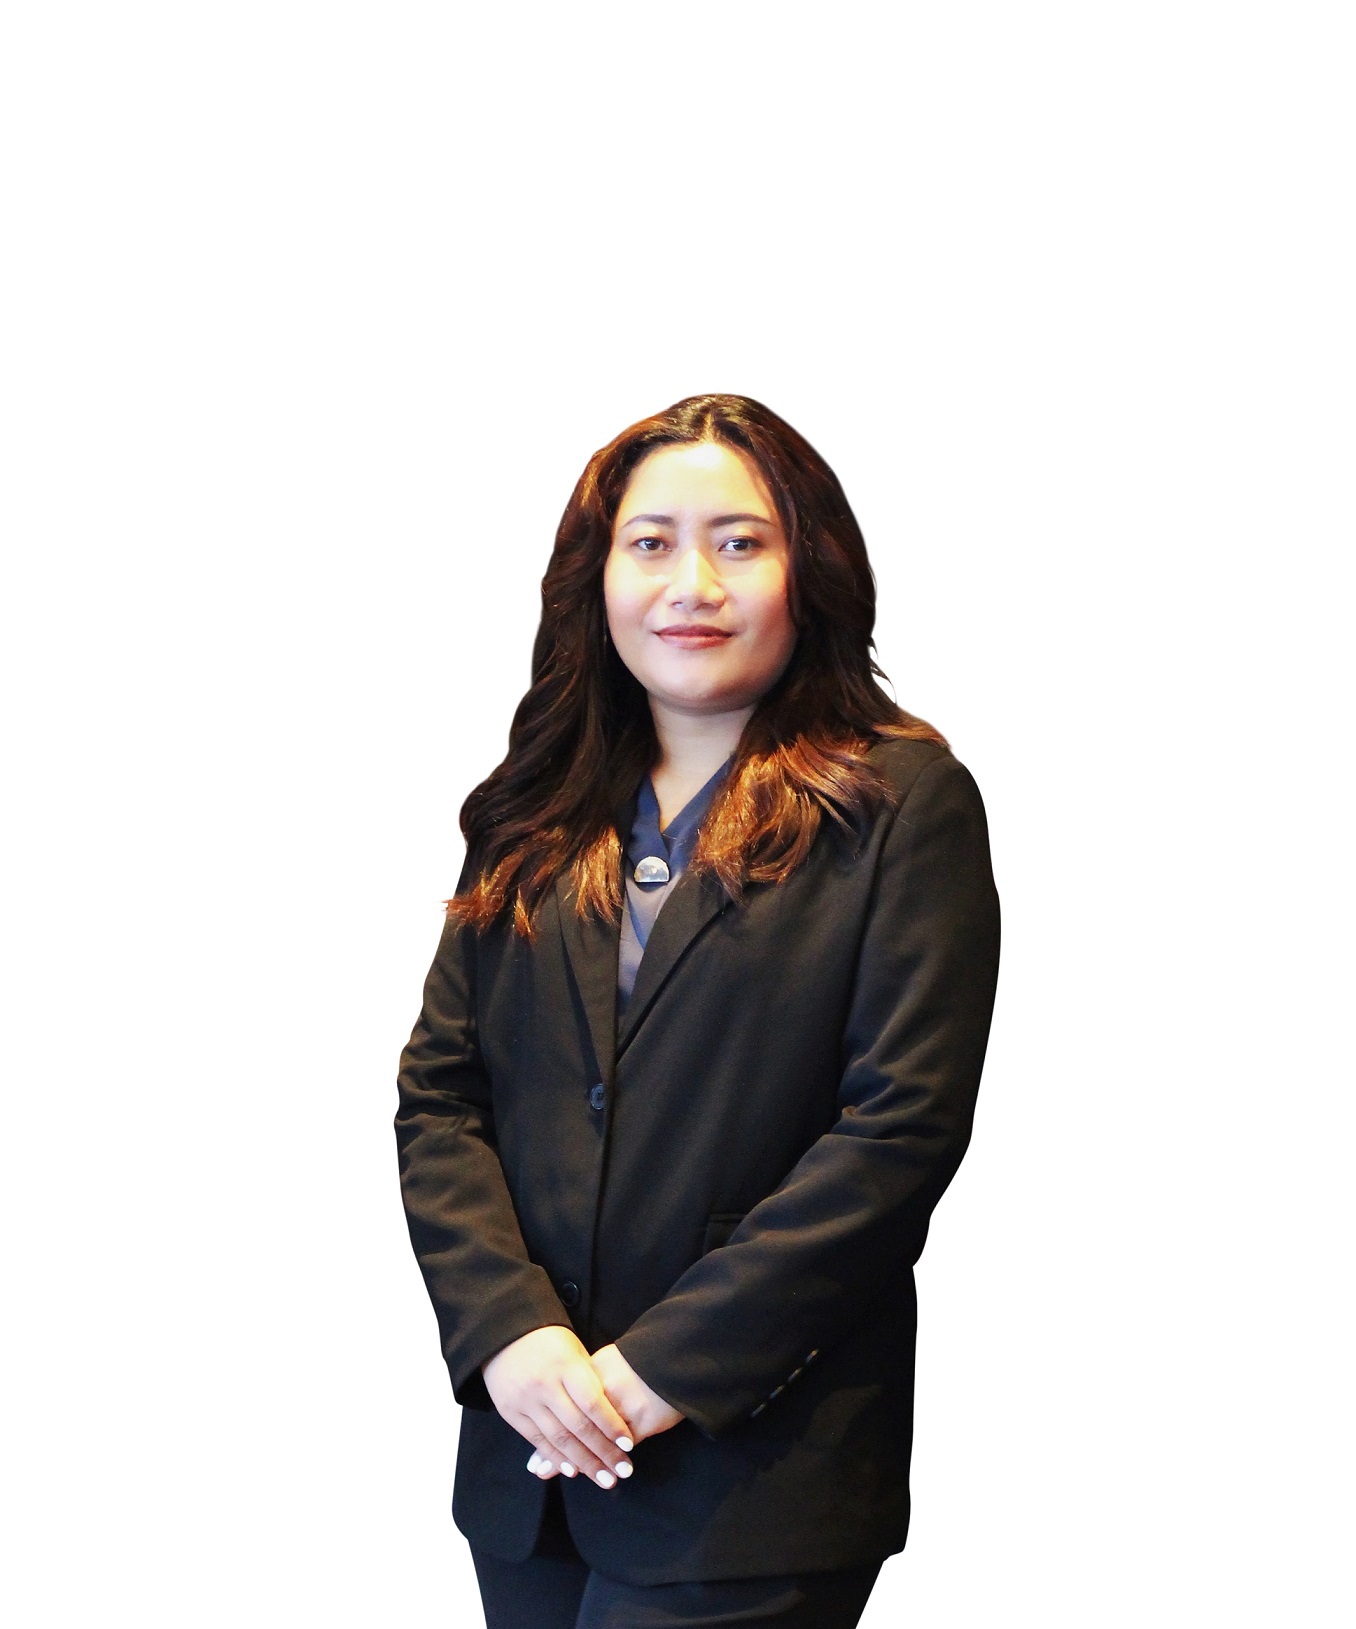 Saithong Yanit frontdesk manager at H&P Thailand Law firm